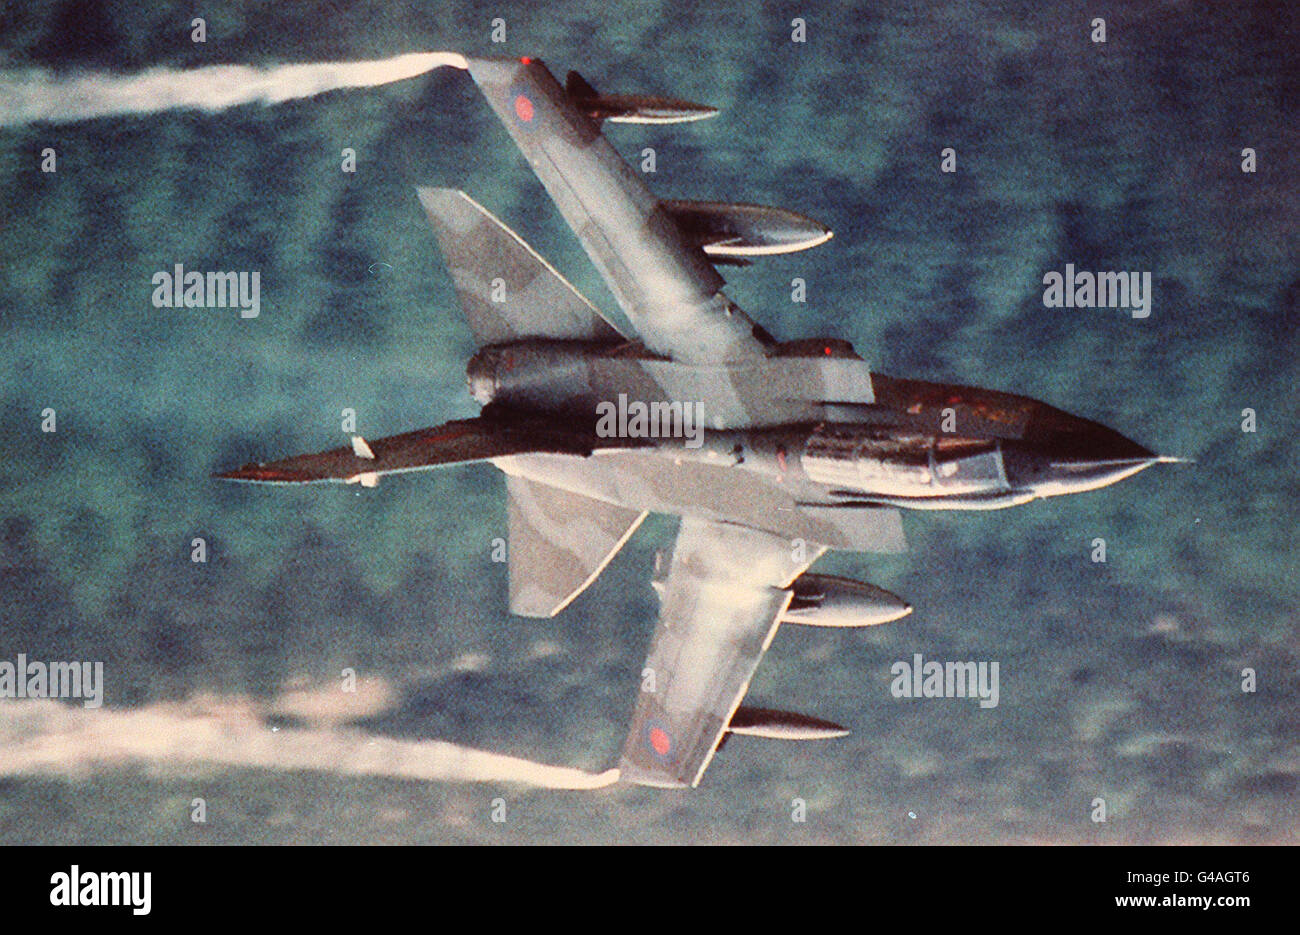 PA NEWS PHOTO 23/6/93 RAF TORNADO GR1 AIRCRAFT SILAR TO THE ONE INVOLVED IN A MID AIR CRASH WITH A CIVILIAN HELICOPTER OVER THE LAKE DISTRICT Stock Photo